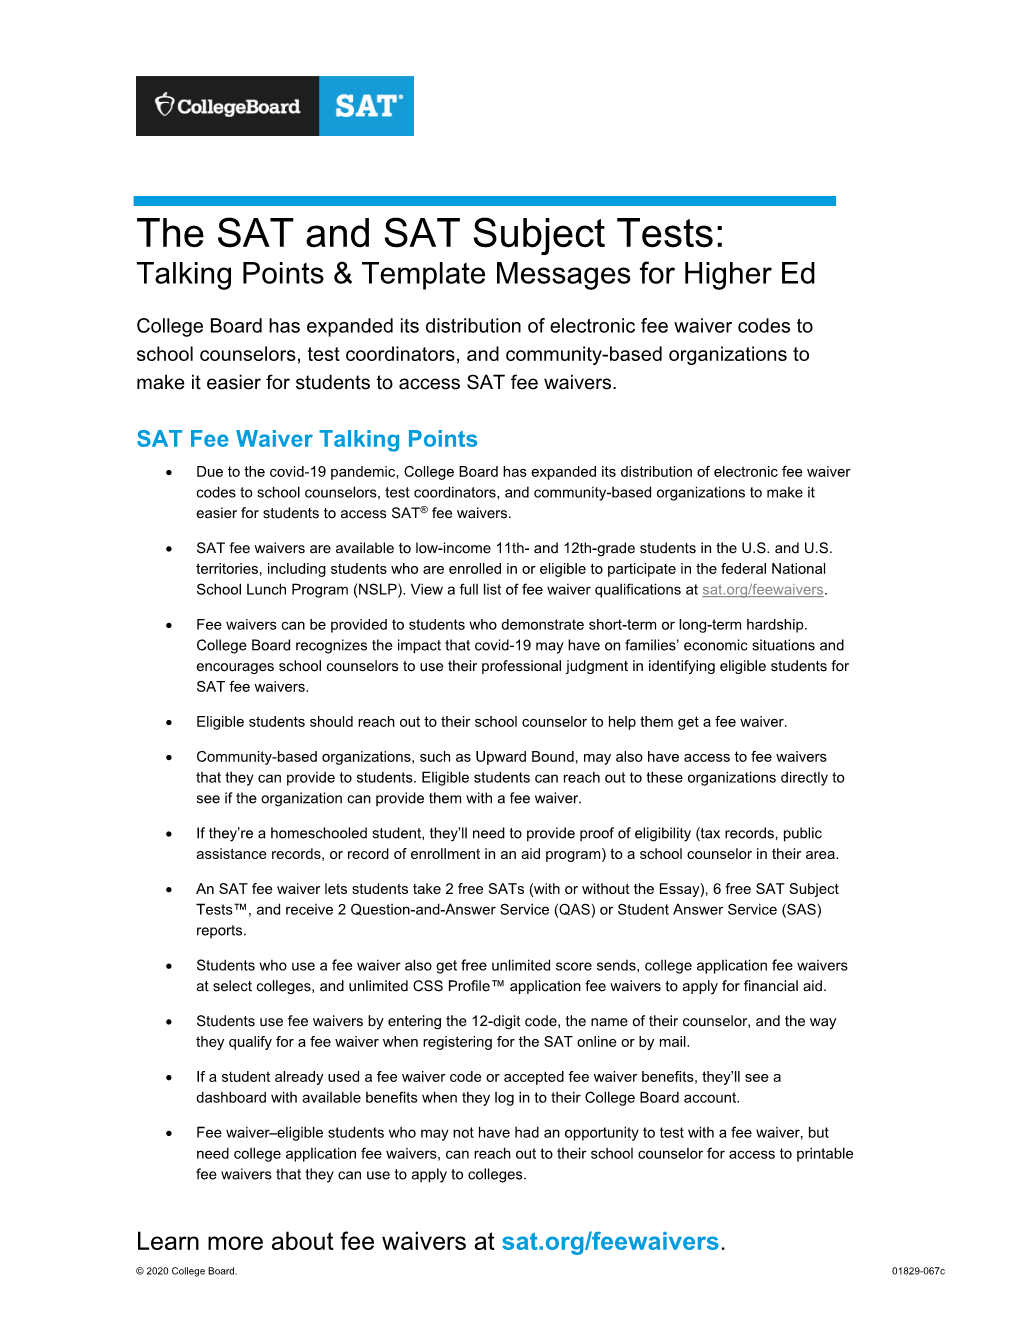 The SAT and SAT Subject Tests: Talking Points & Template